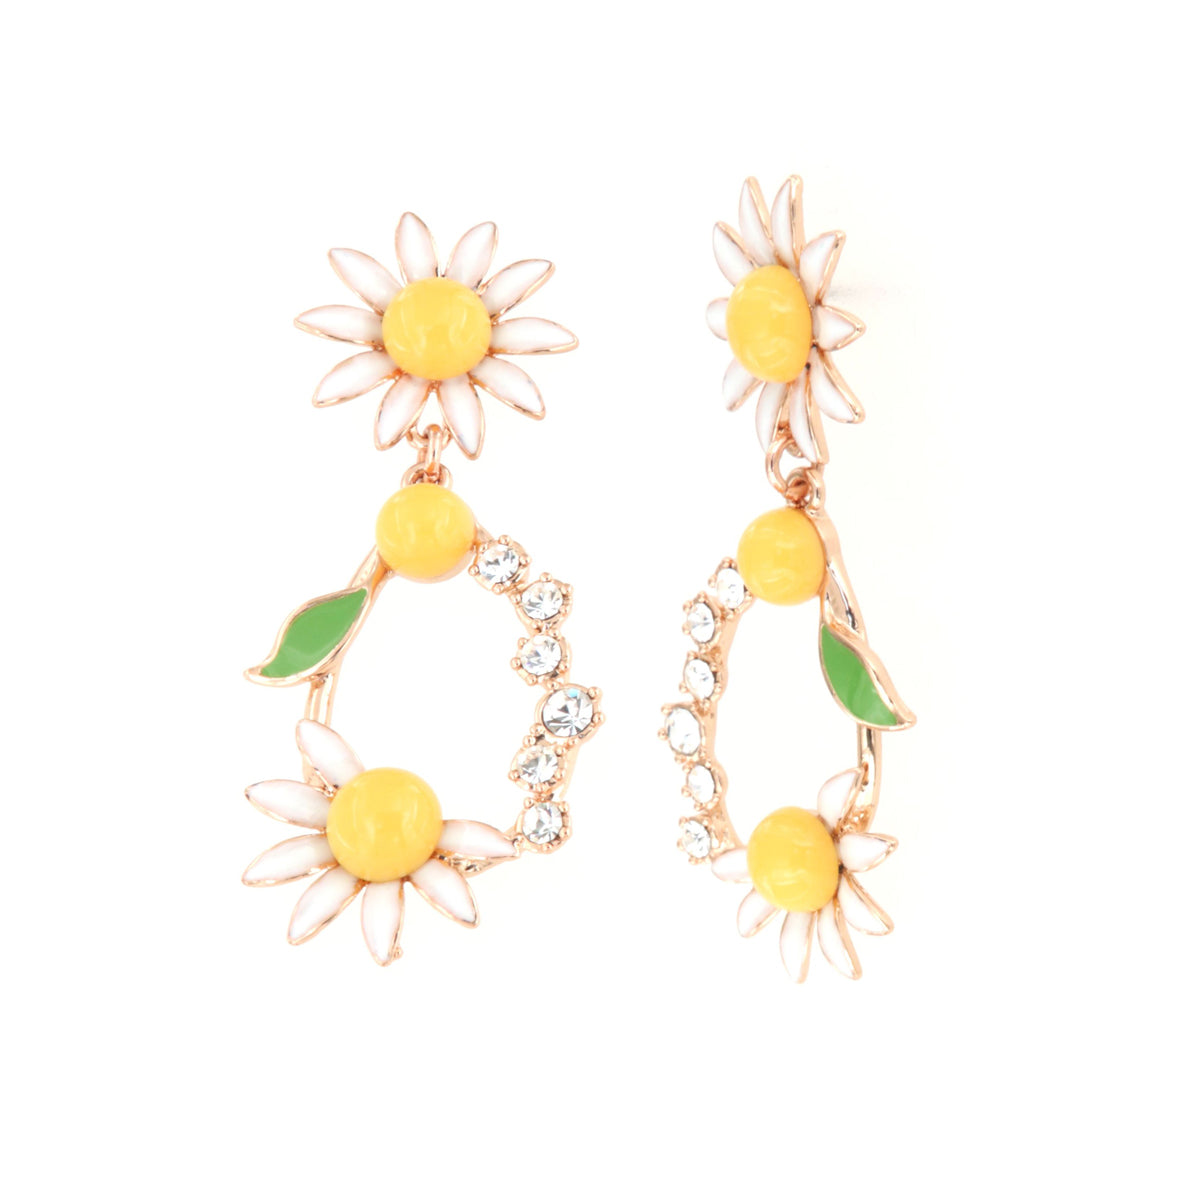 Metal earrings with pendant daisies embellished with colored enamels and Bianchj crystals